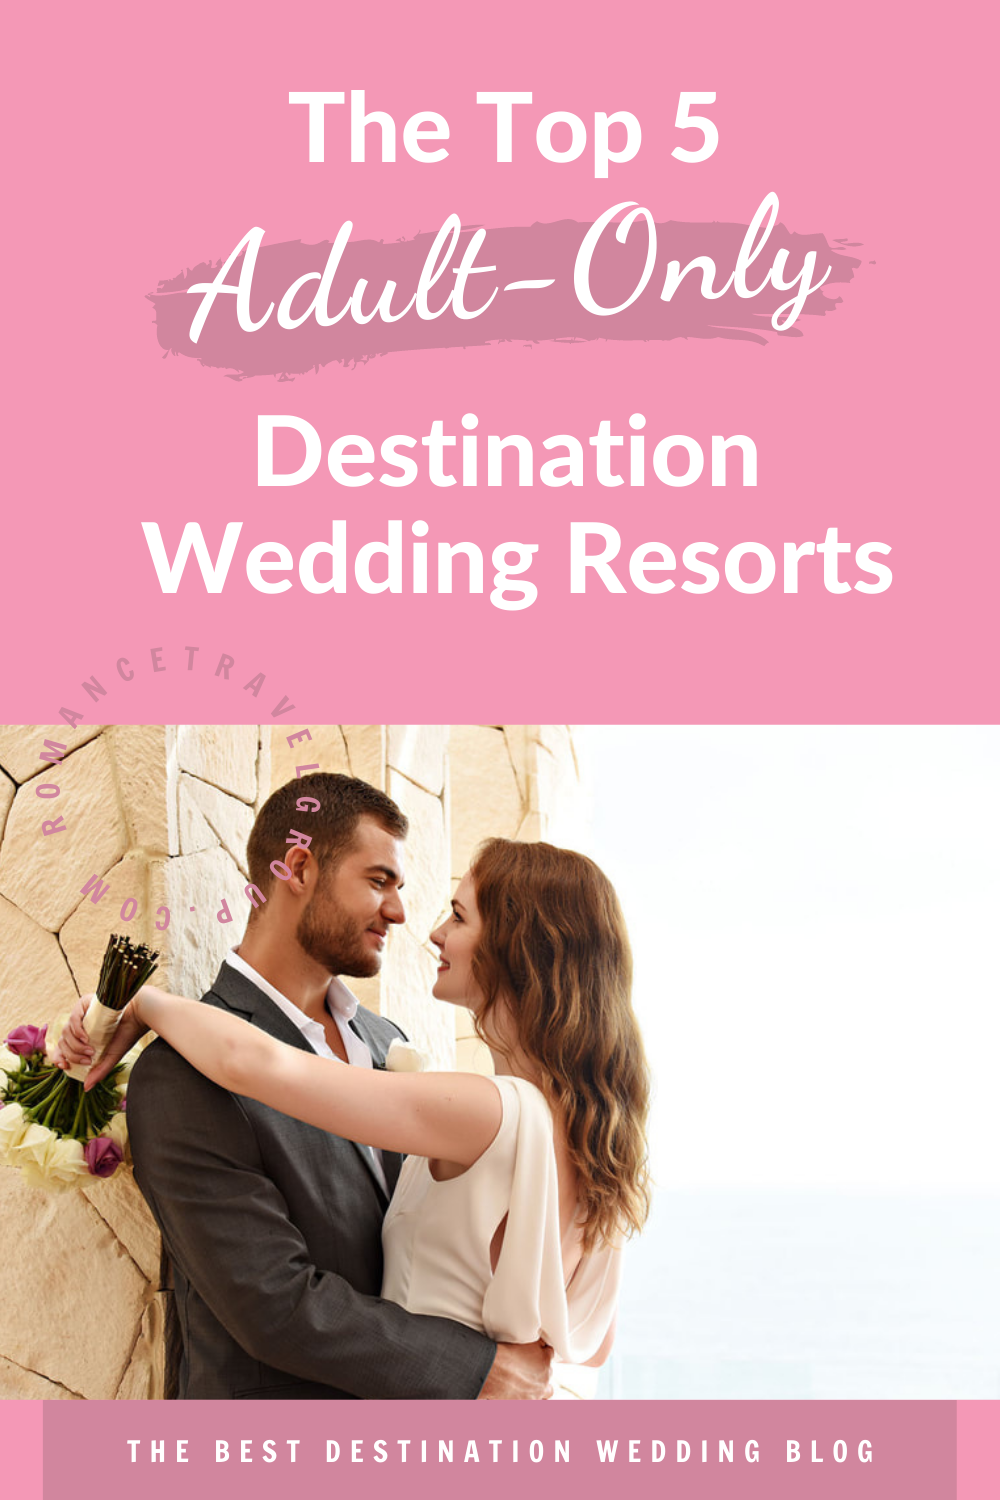 The Top 5 Adult Only Destination Wedding Resorts